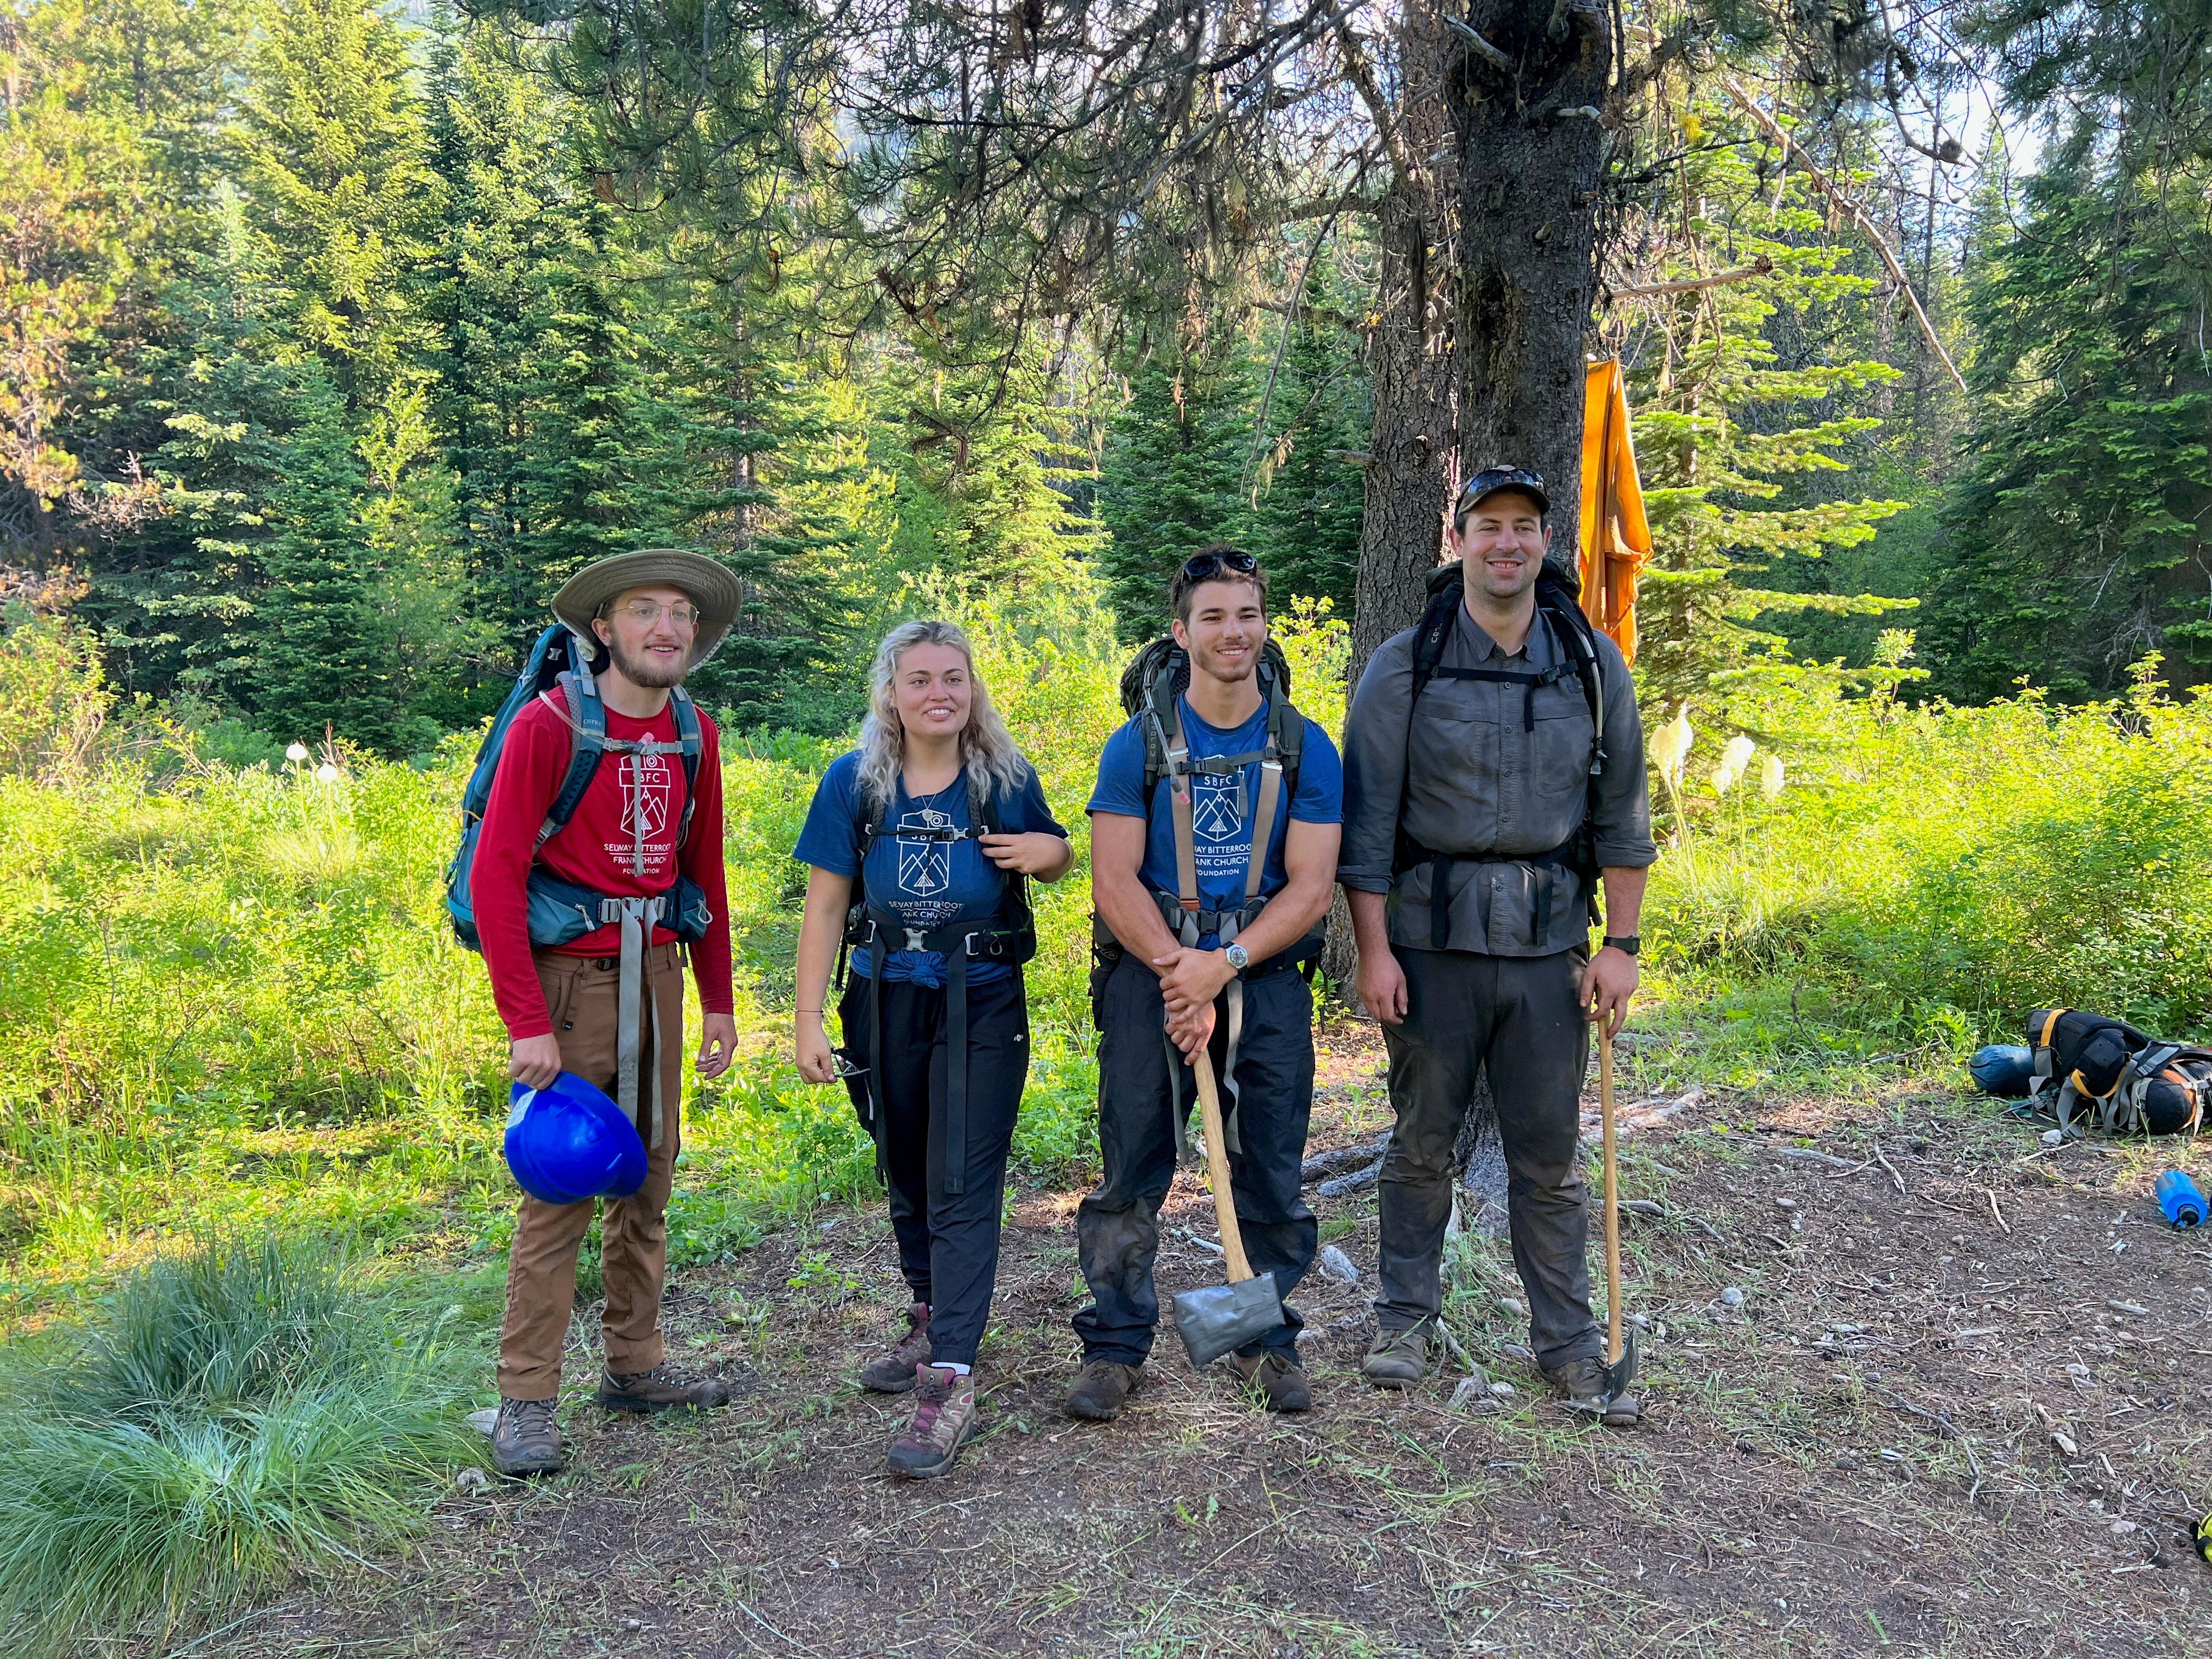 Four hikers stand together and smile. Two of them are holding axes